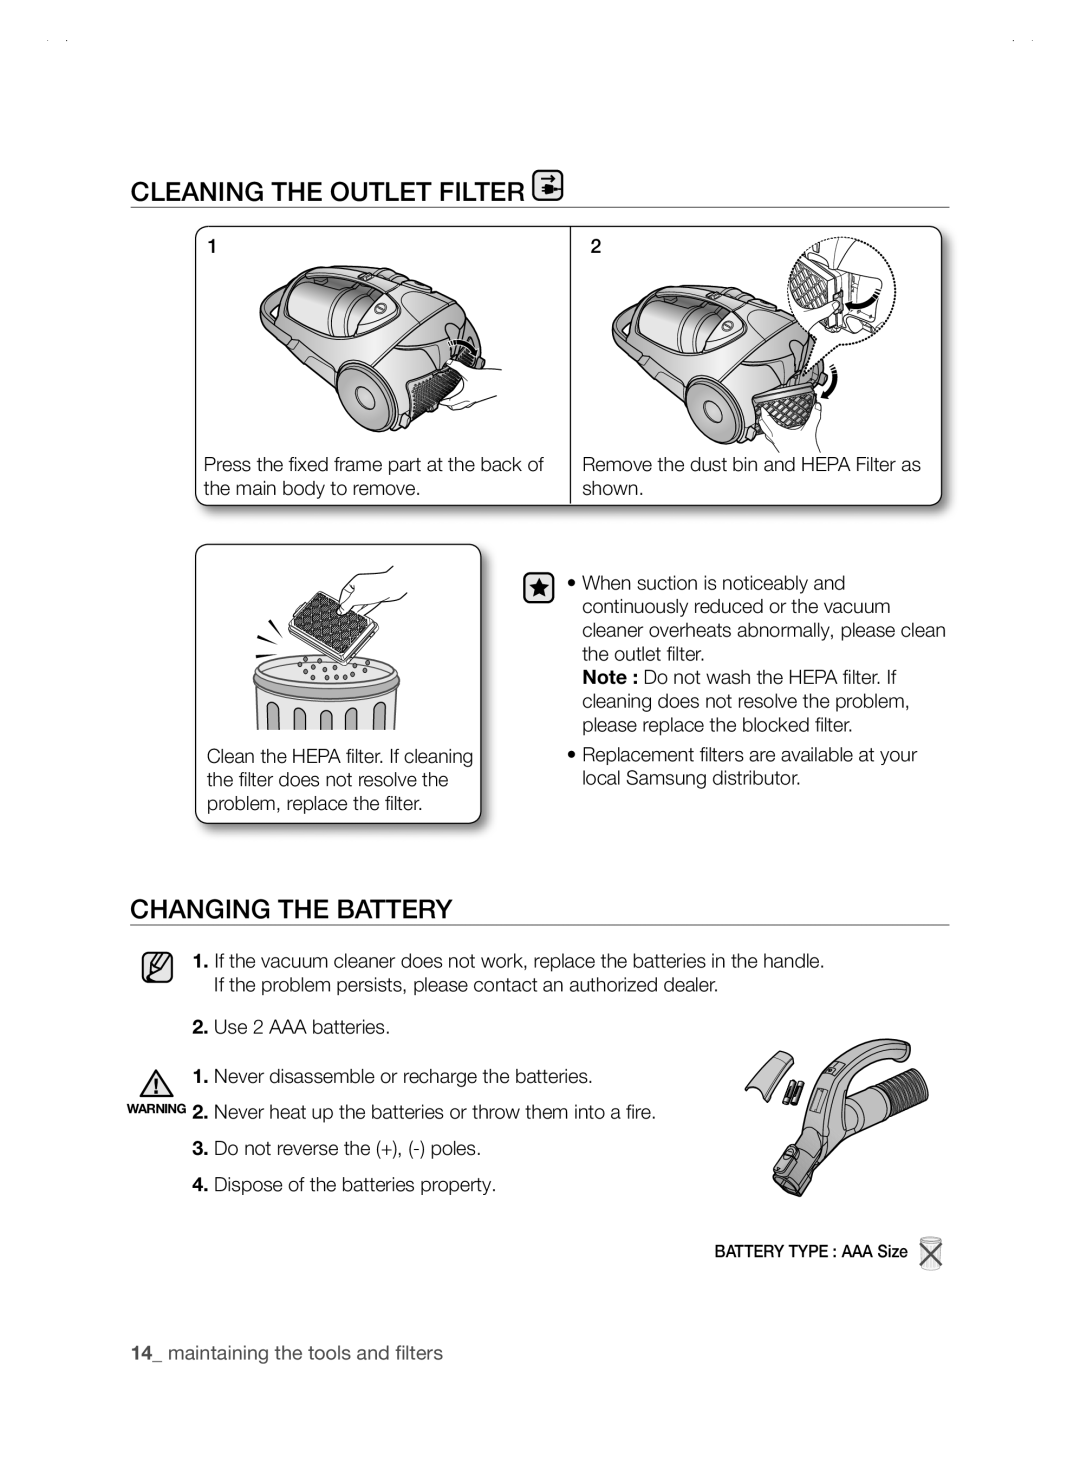 Samsung SC88P user manual Cleaning The Outlet Filter, changing the battery, 14_ maintaining the tools and filters 